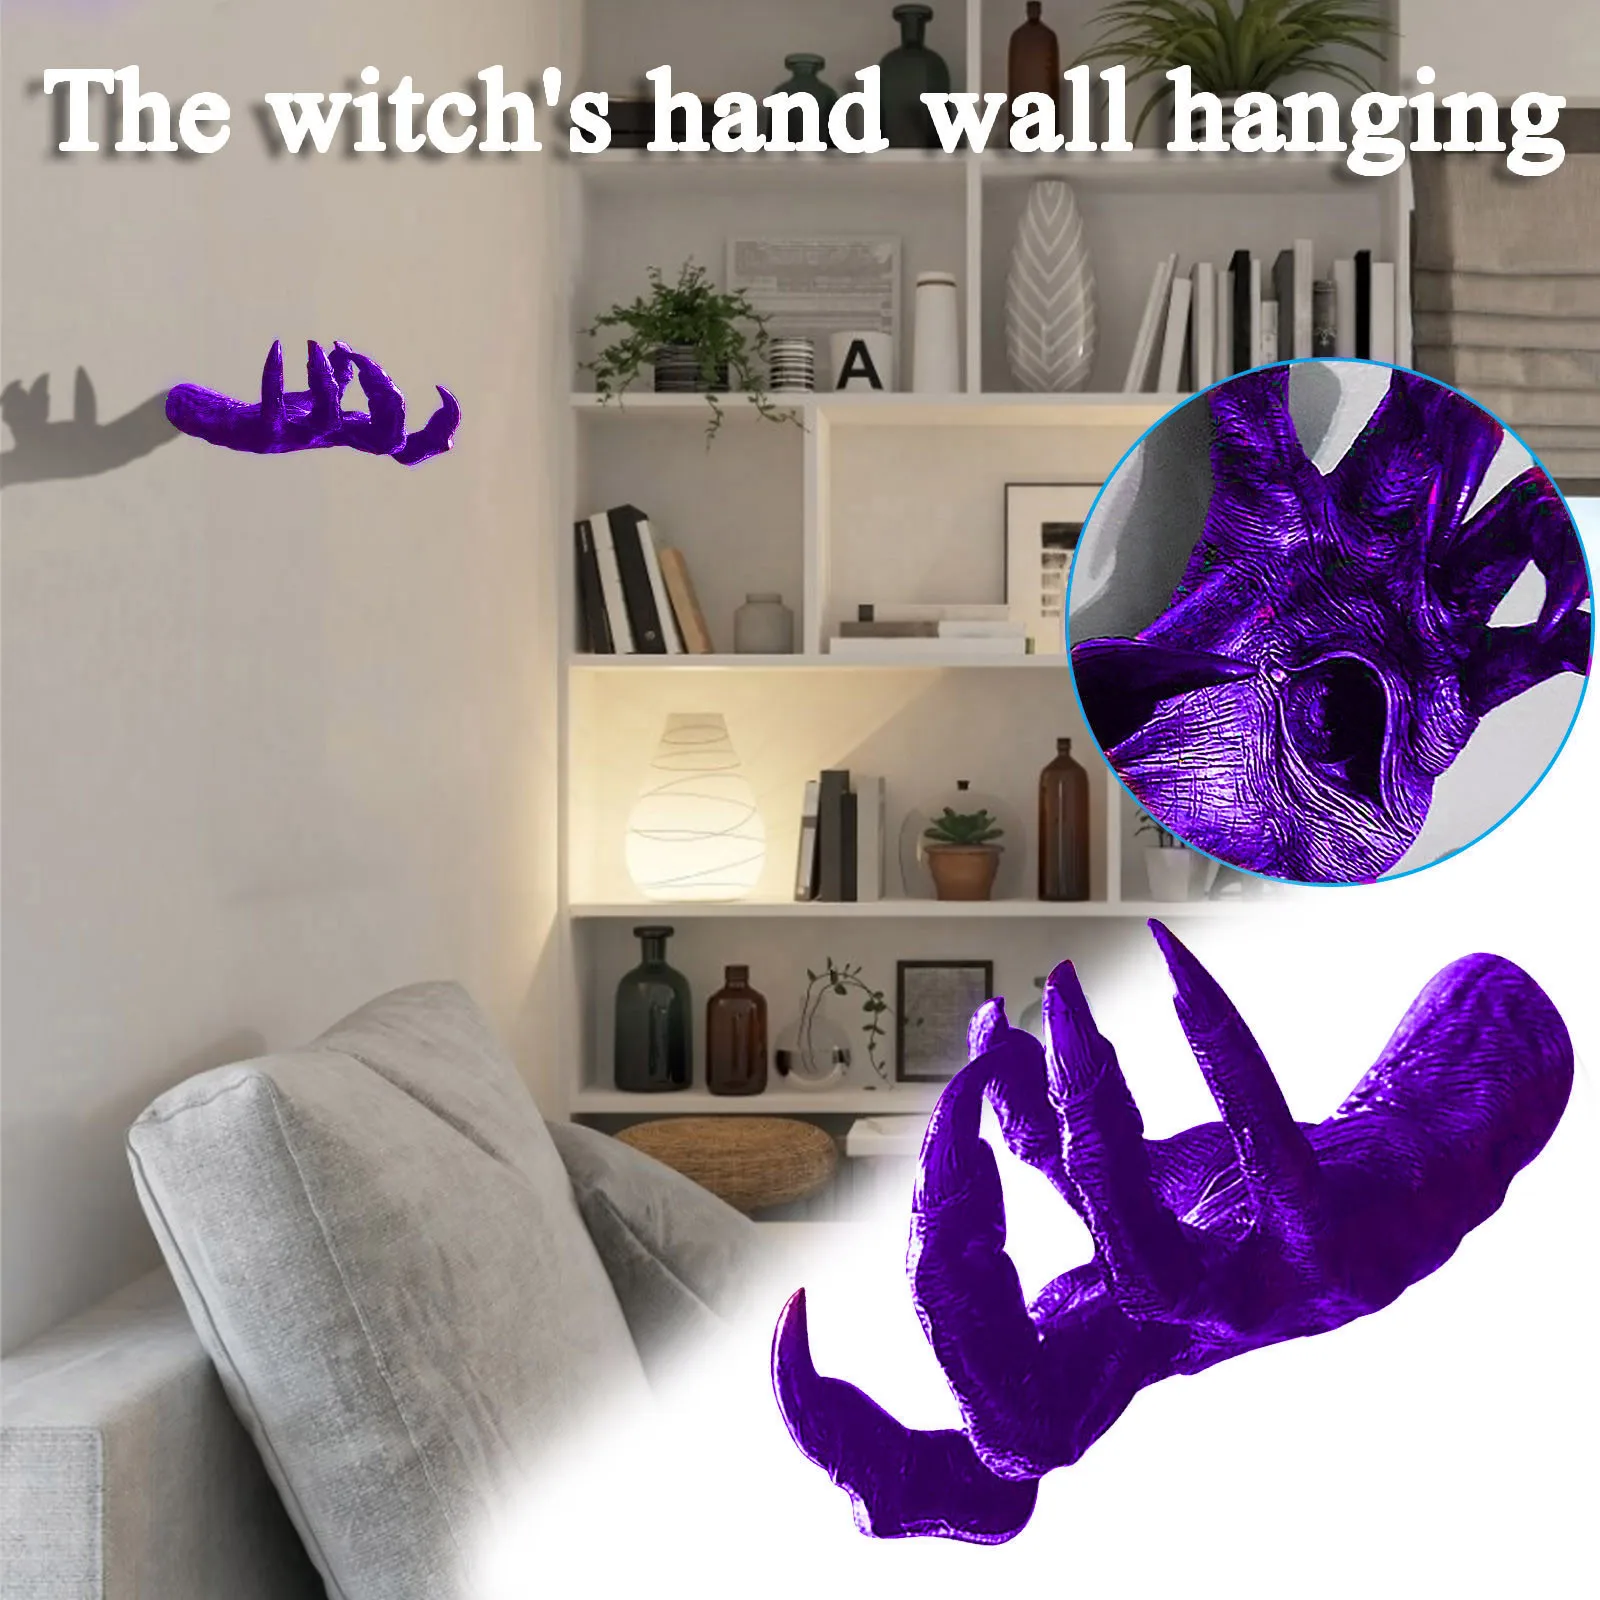 Witch's Hand Wall Hanging Statues Art Sculpture Resin Retro Figures Creative 